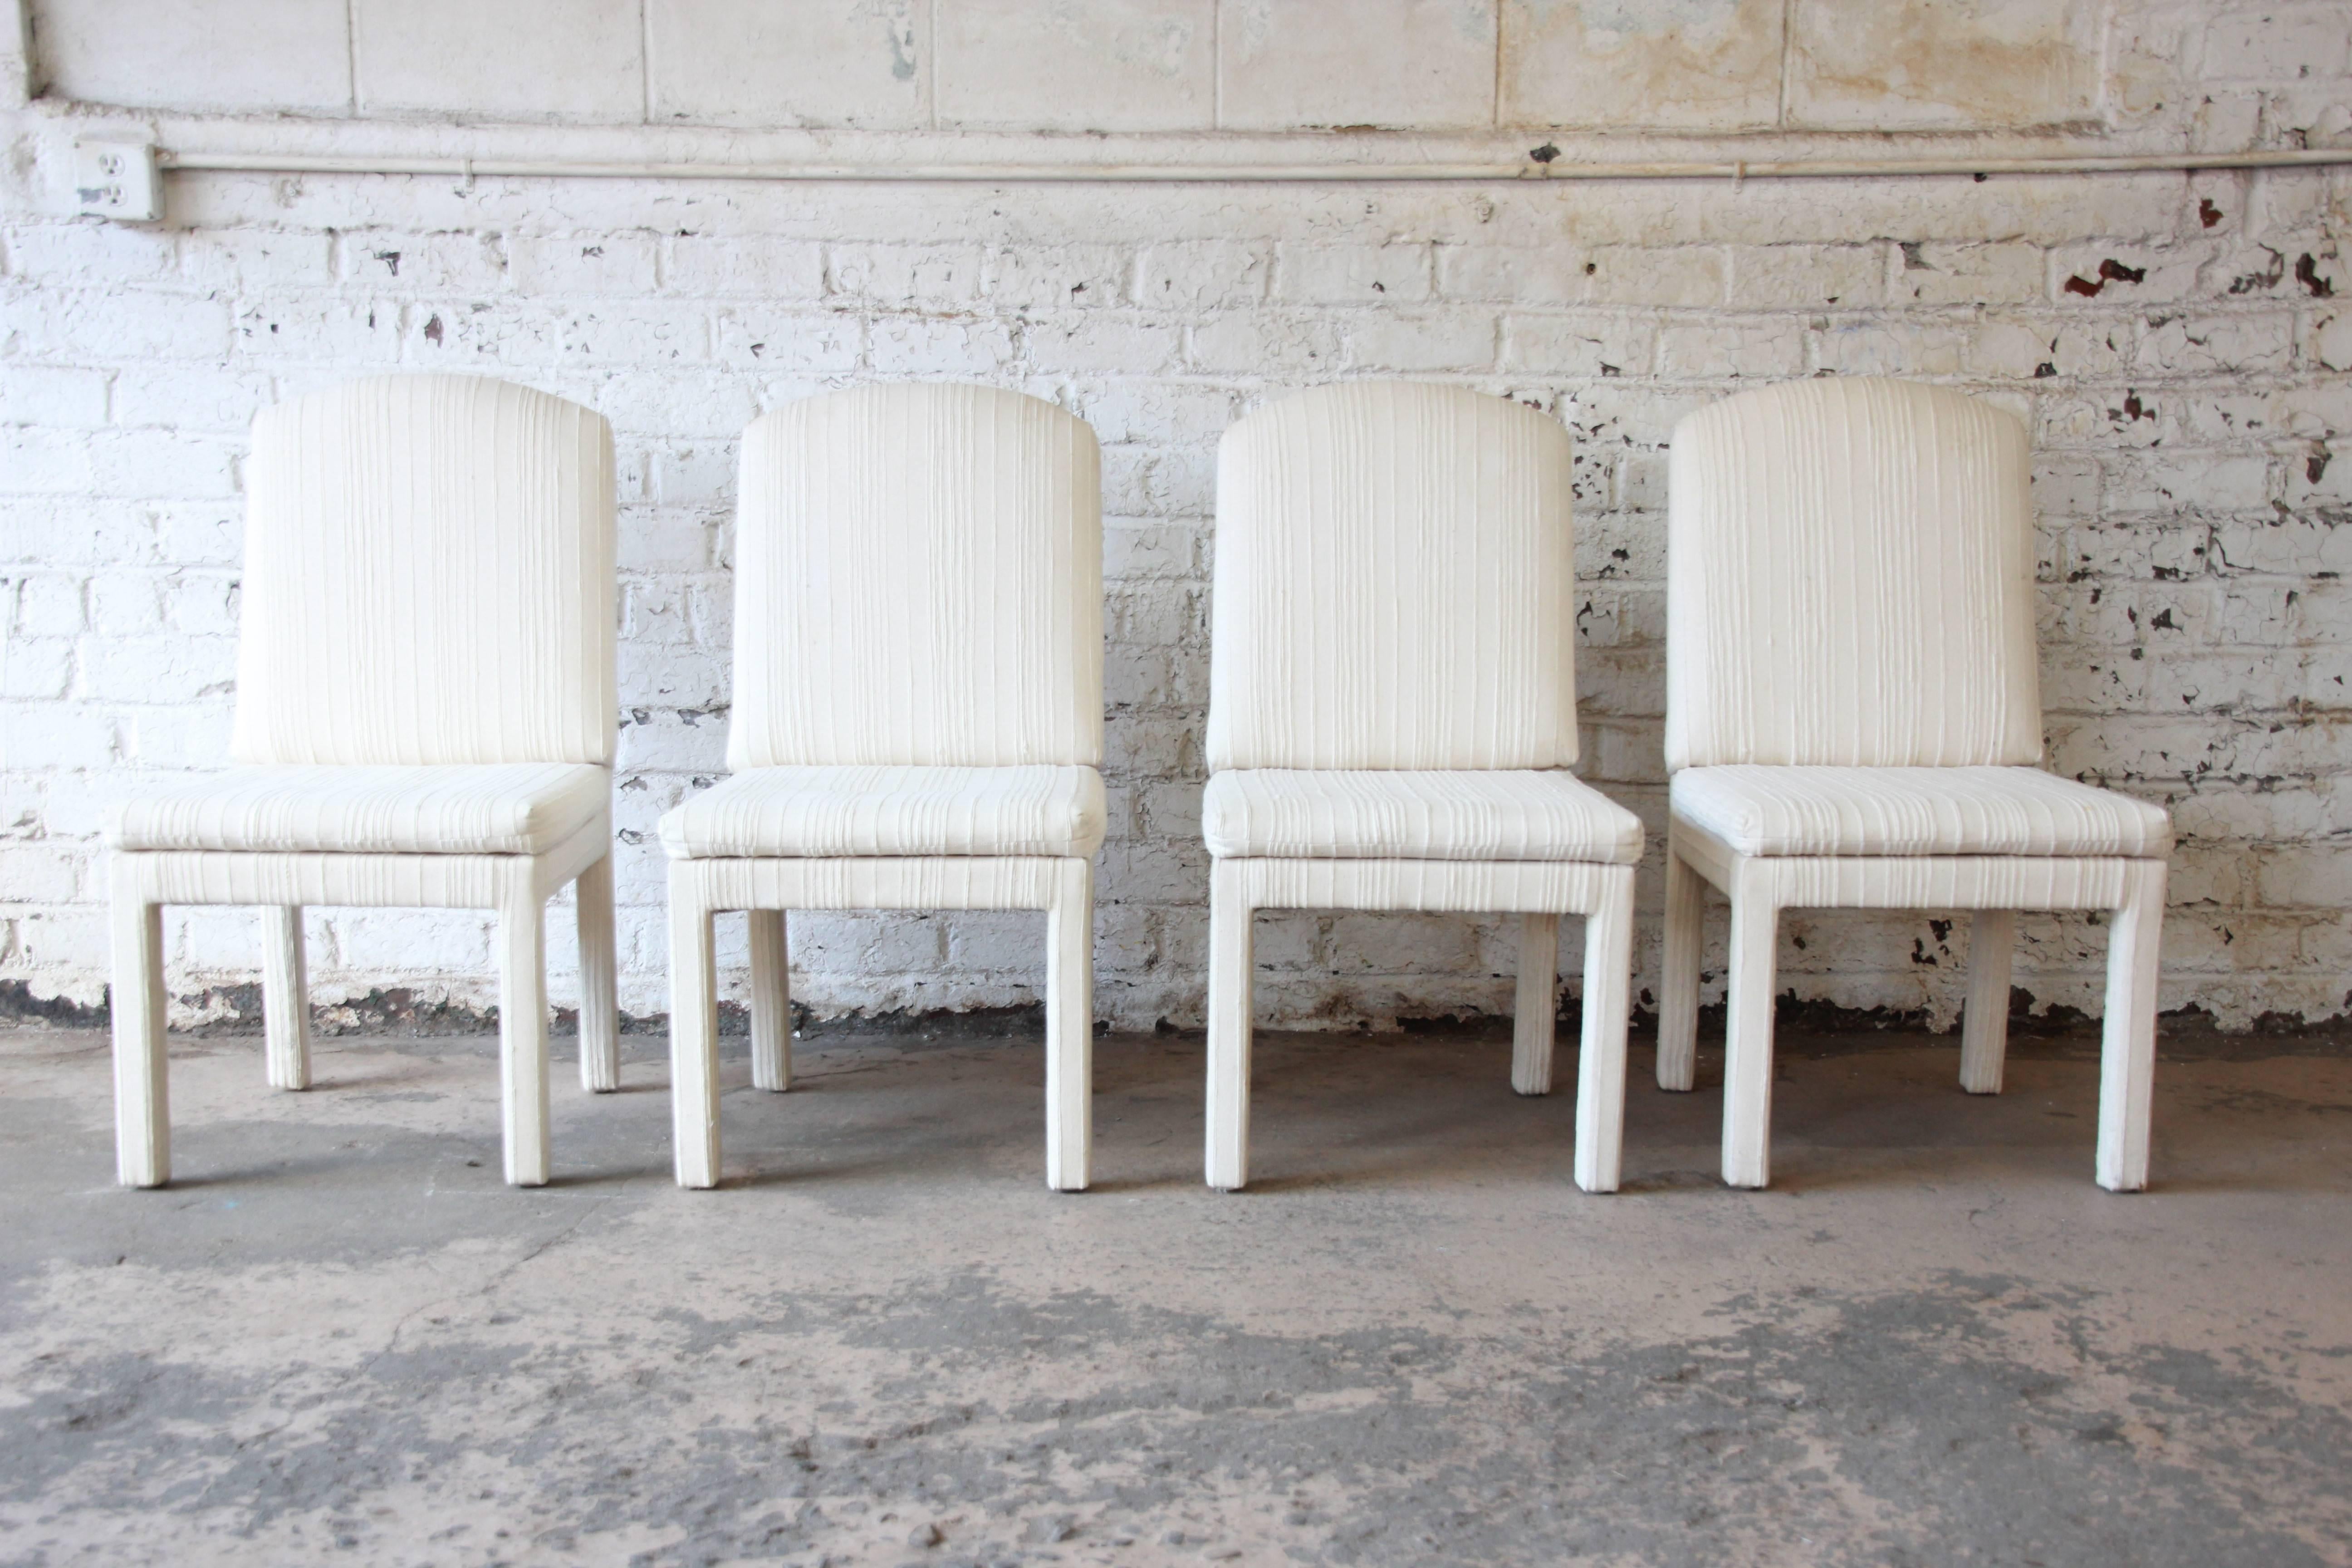 A stylish set of four Parsons dining chairs made by Design Institute America in the style of Milo Baughman. The chairs are sturdy and very comfortable. Ivory upholstery is original and in fair condition. Could easily be reupholstered if desired.